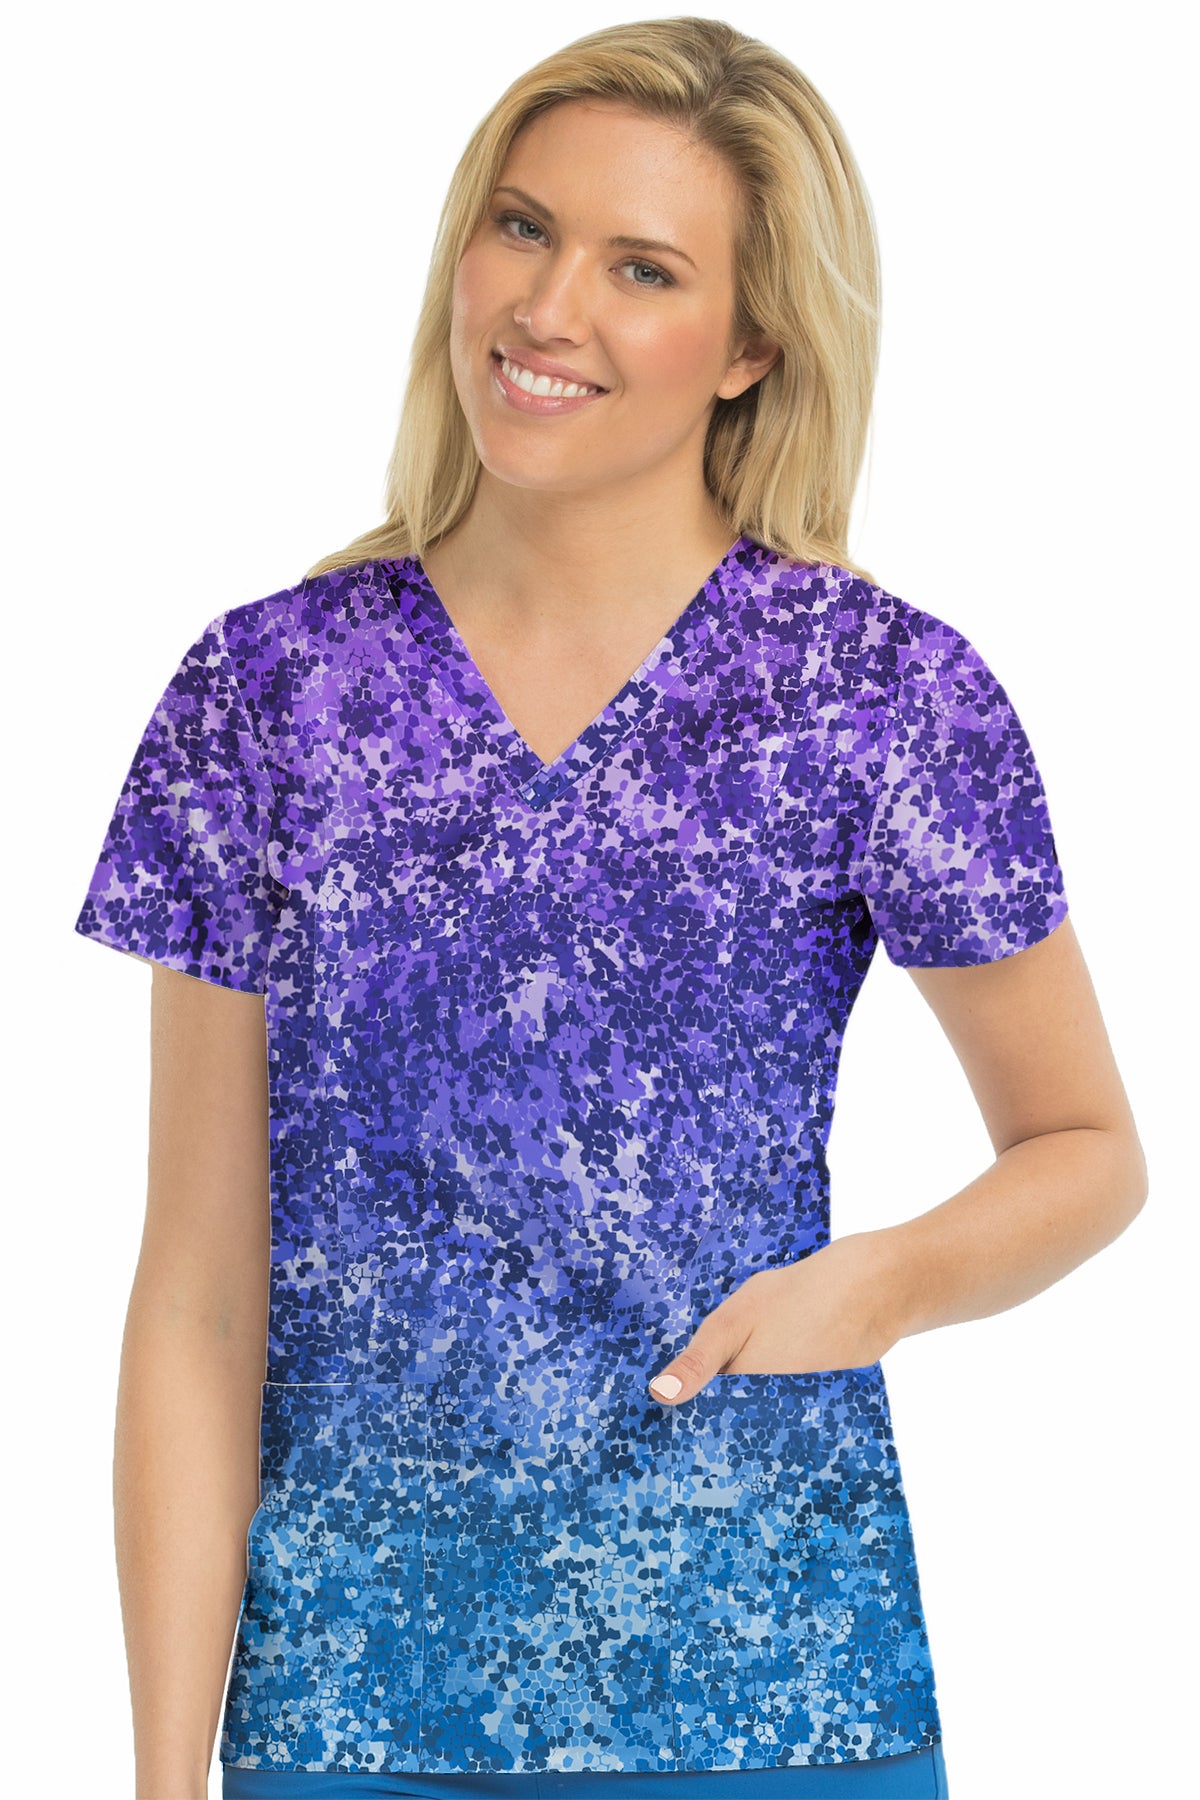 Med Couture Activate Spinkle Ombre V-Neck Print Scrub Top at Parker's Clothing and Shoes.